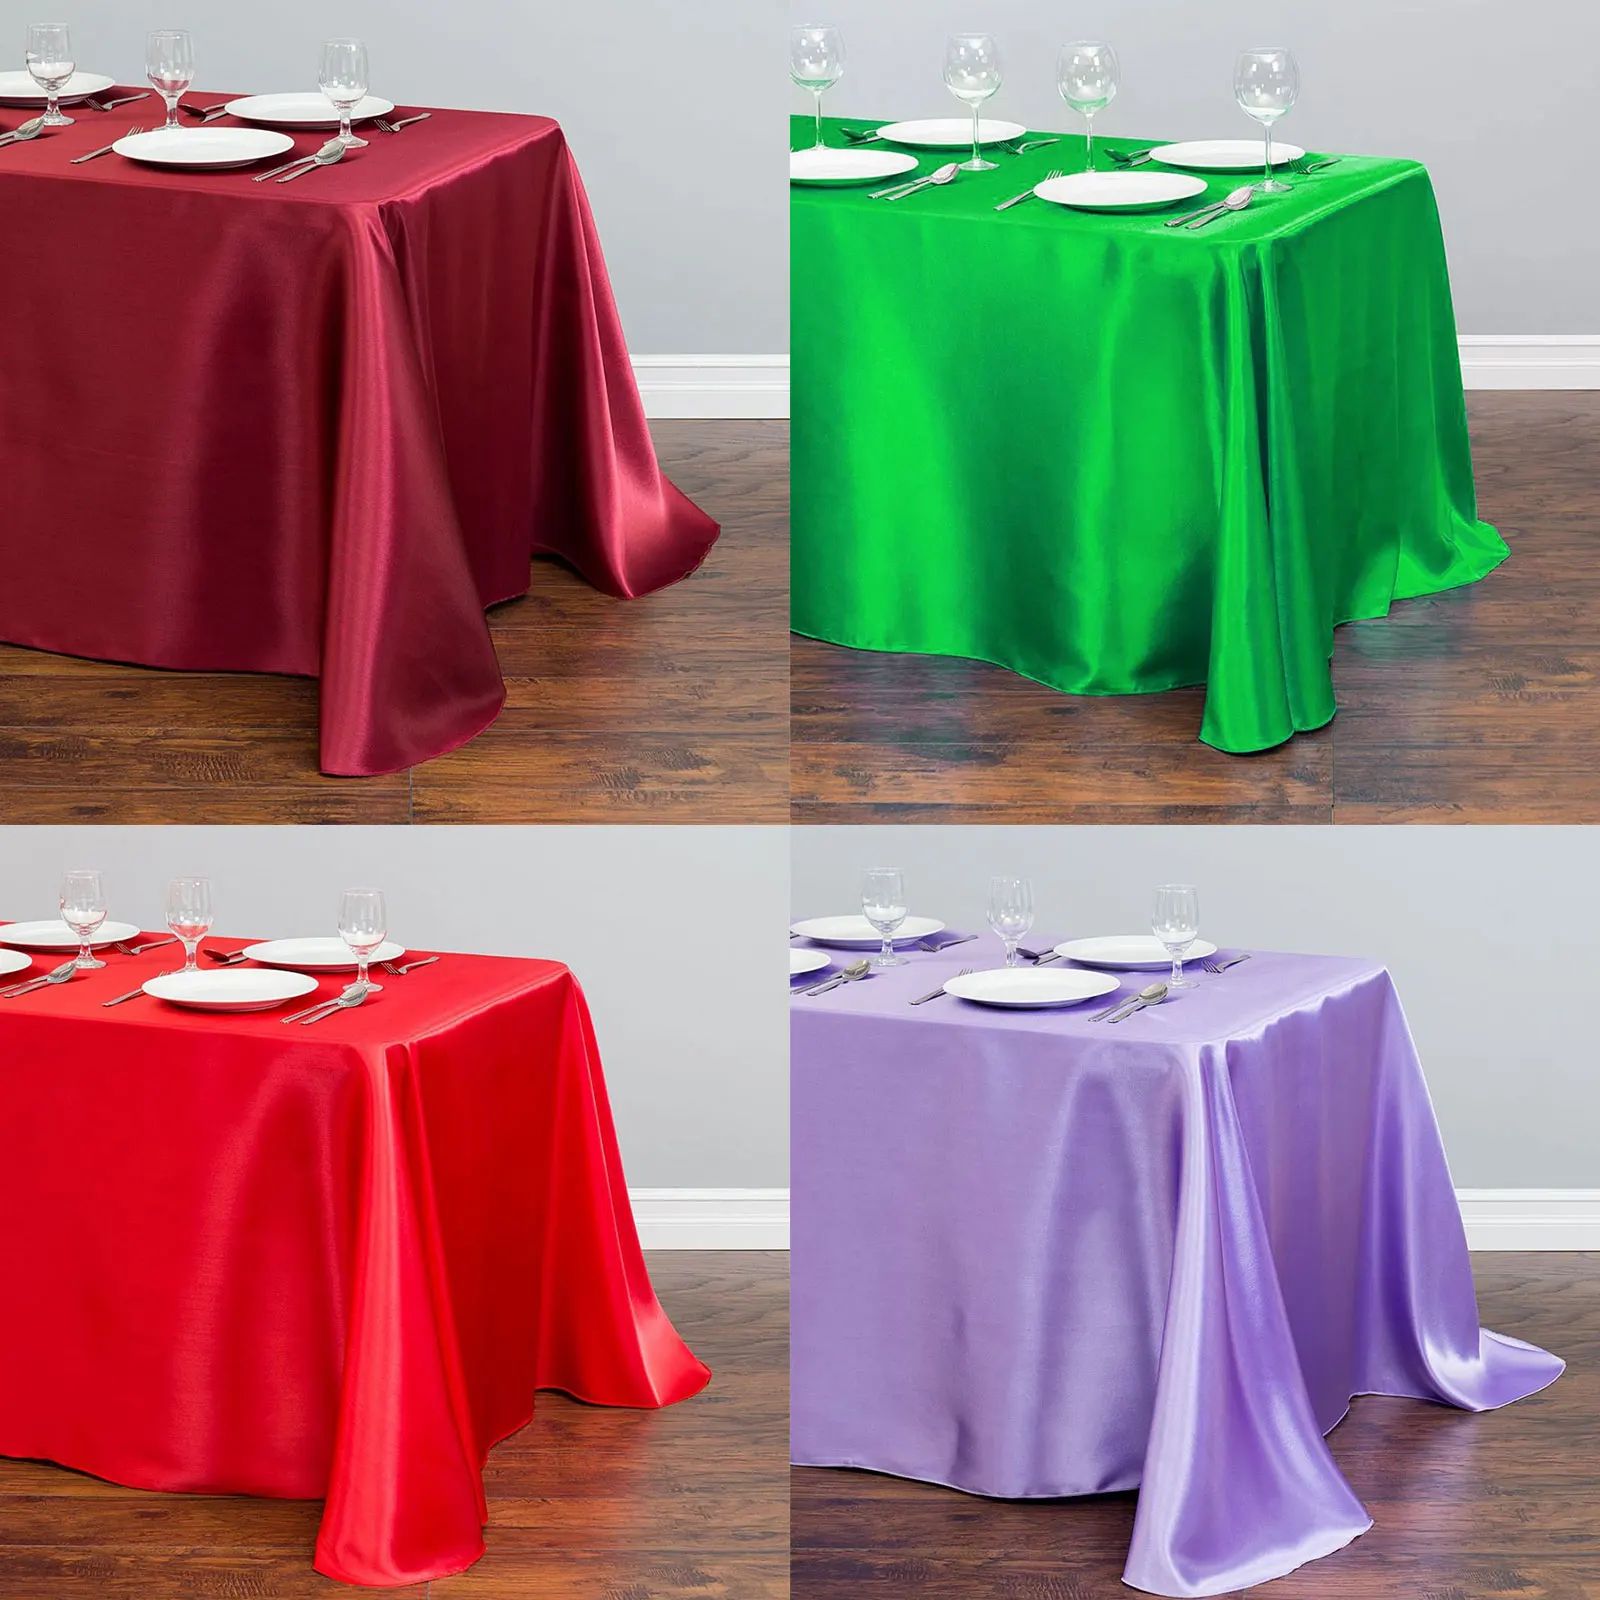 1pcs 22 Solid Color Satin Tablecloth for Wedding Decors Christmas Table Cover Round Square Table Cloth Home Dining Table Decor